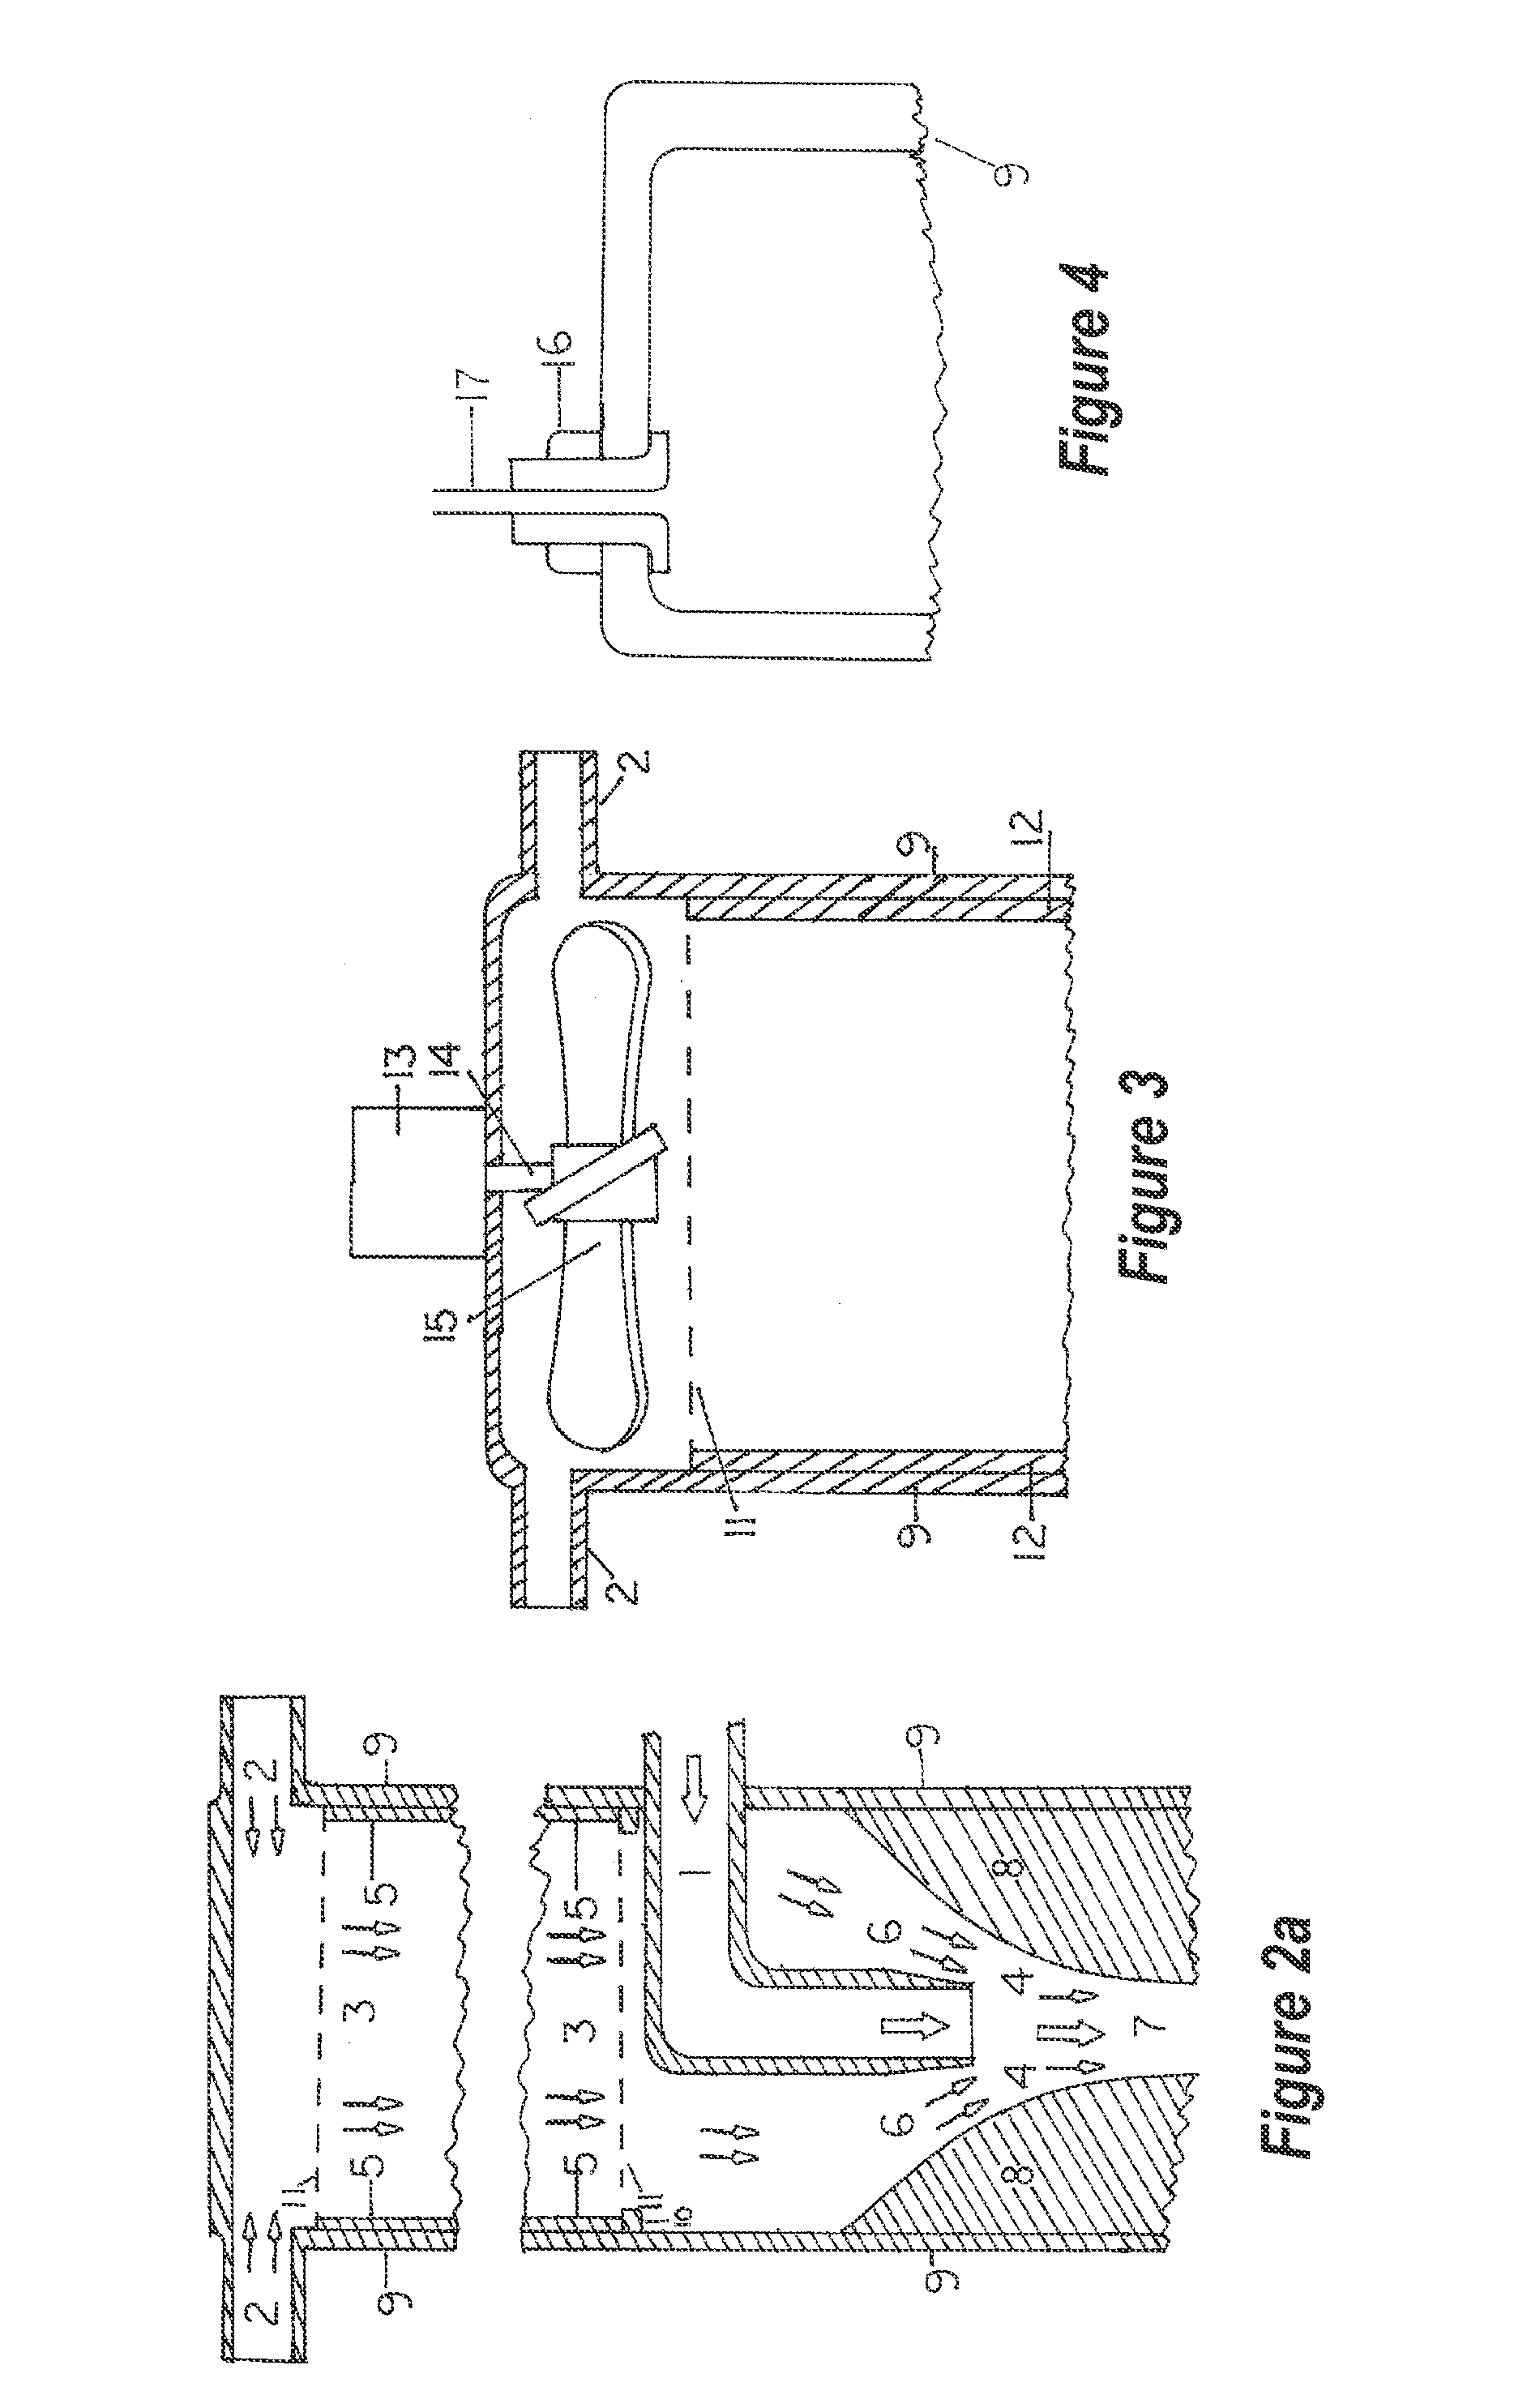 Ancillary embodiments and modifications to a polyphasic pressurized homogenizer